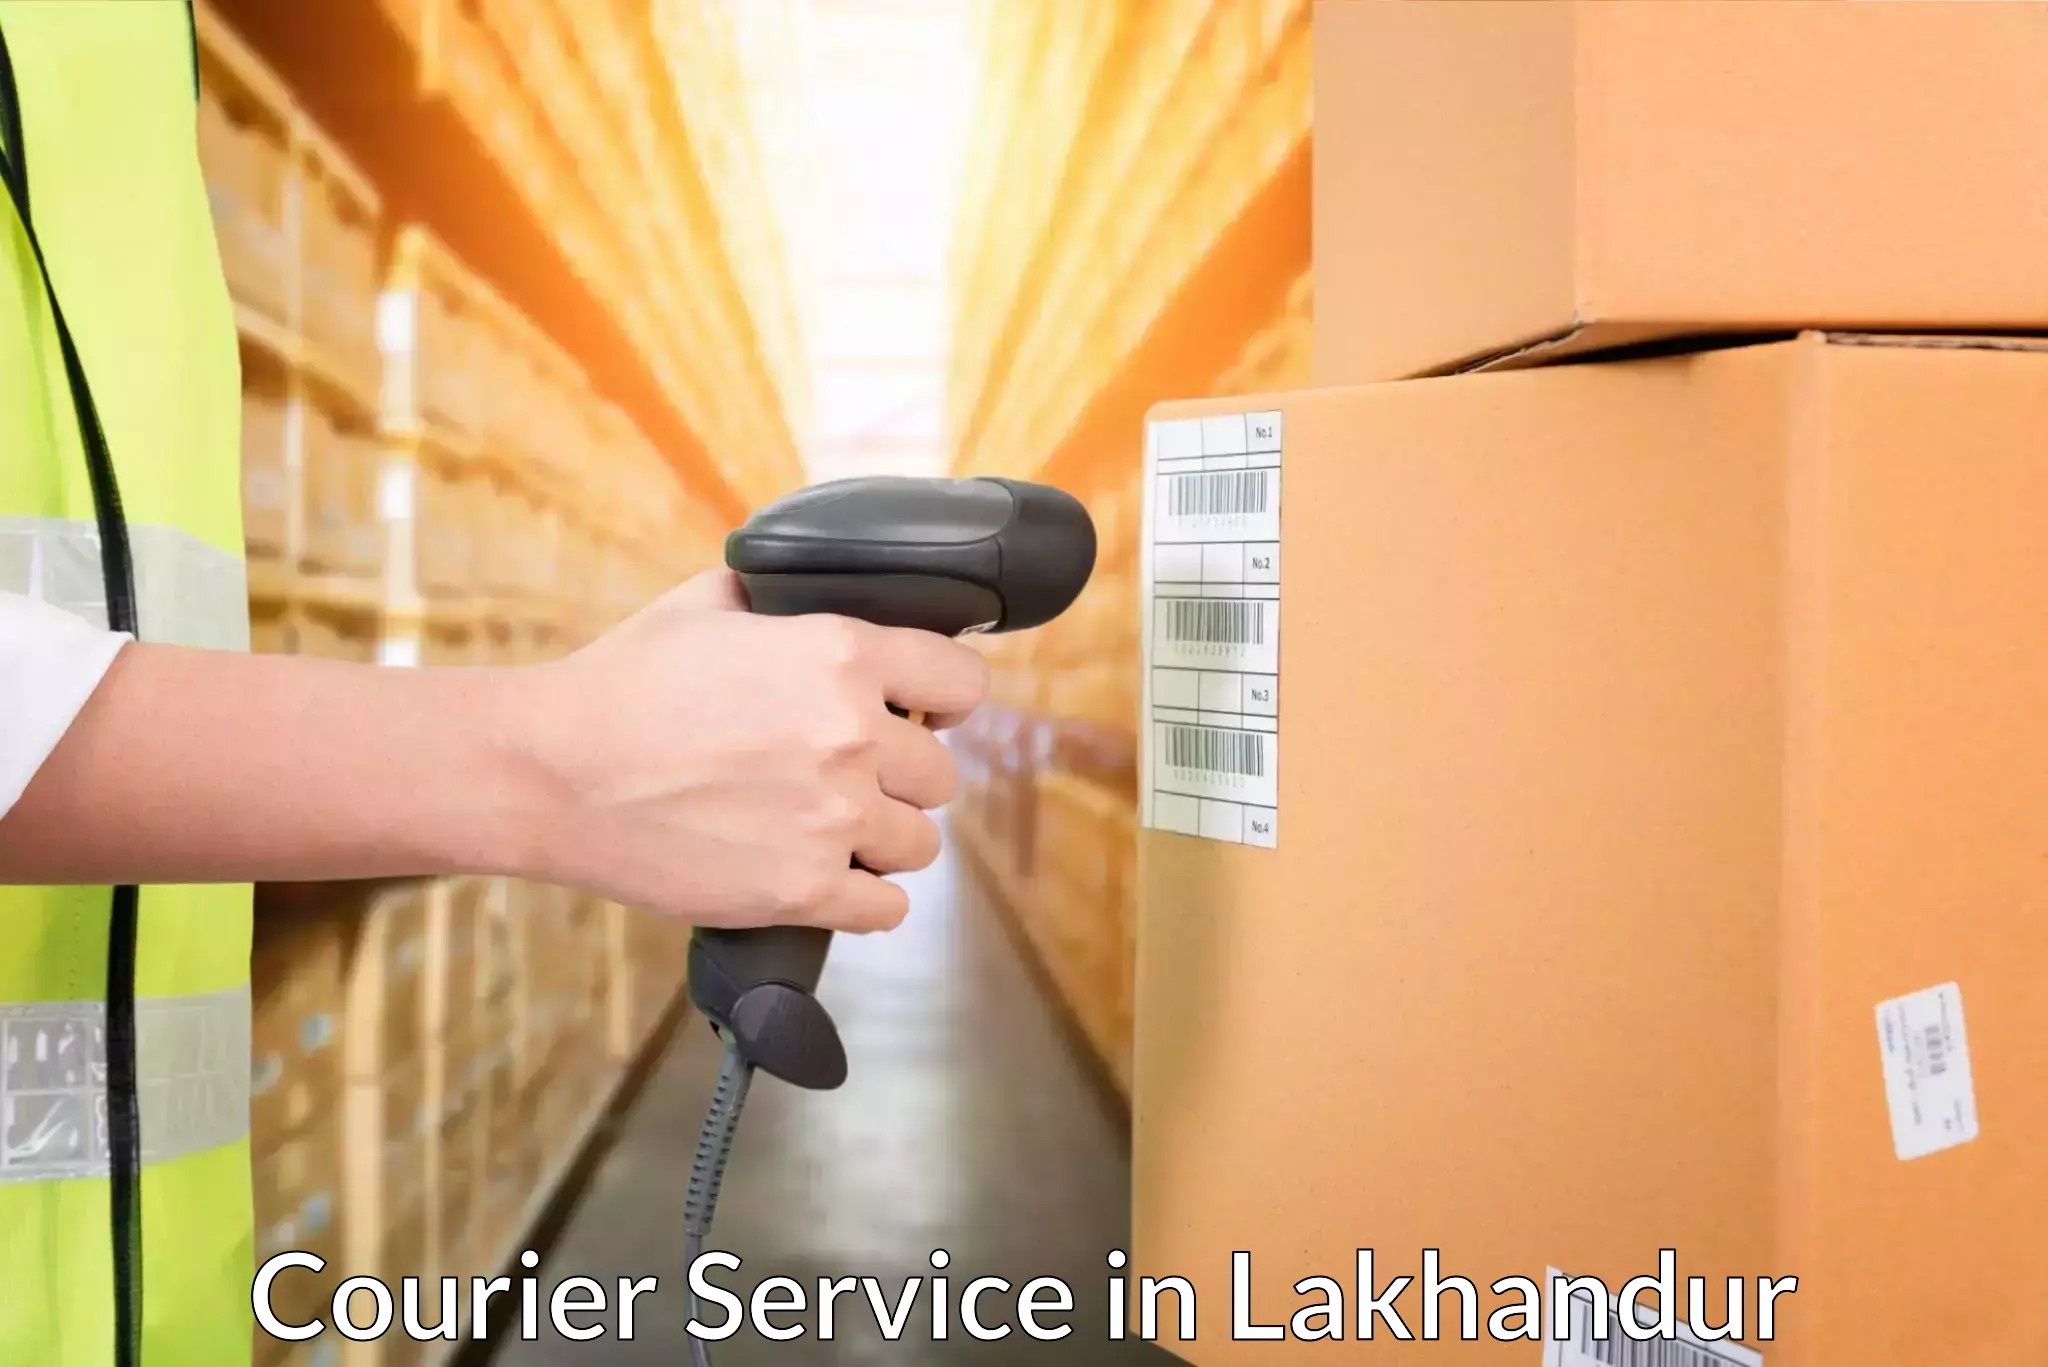 Comprehensive freight services in Lakhandur